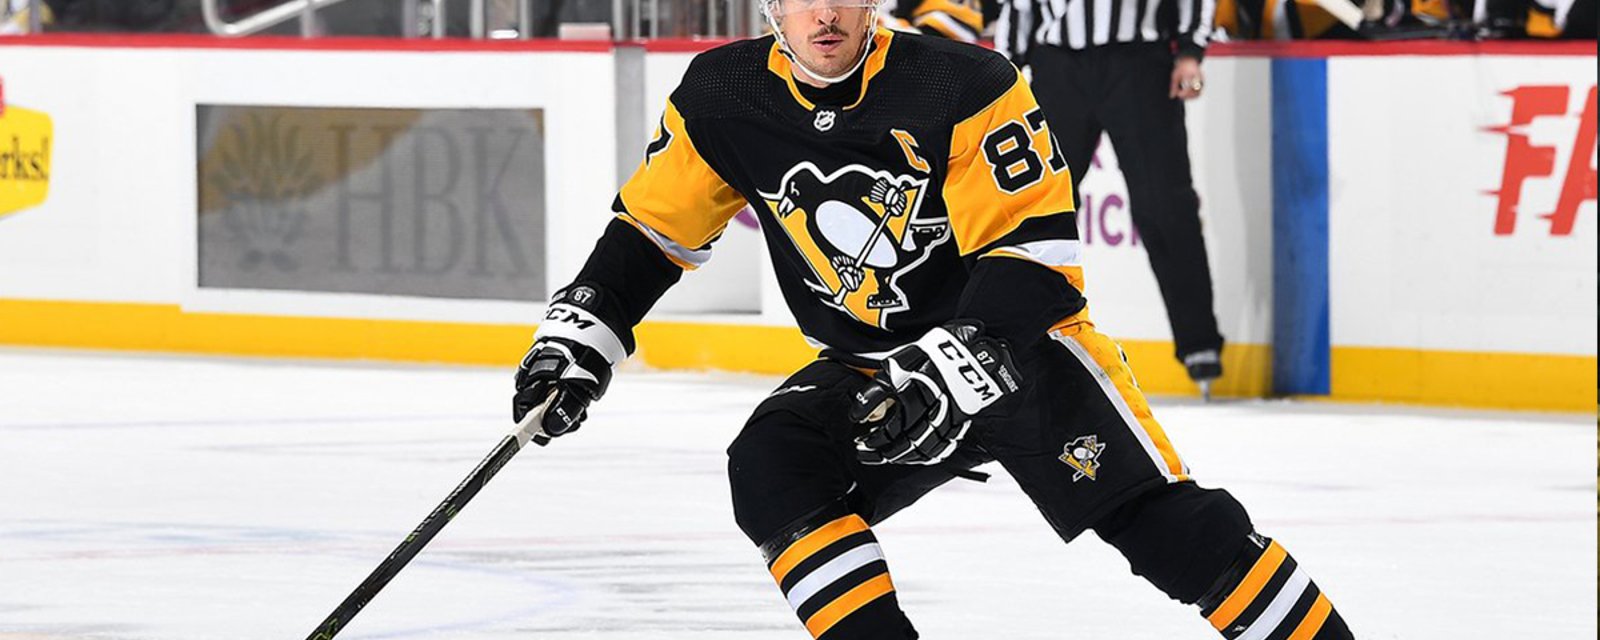 Gameday Report: Crosby returns to Pens lineup